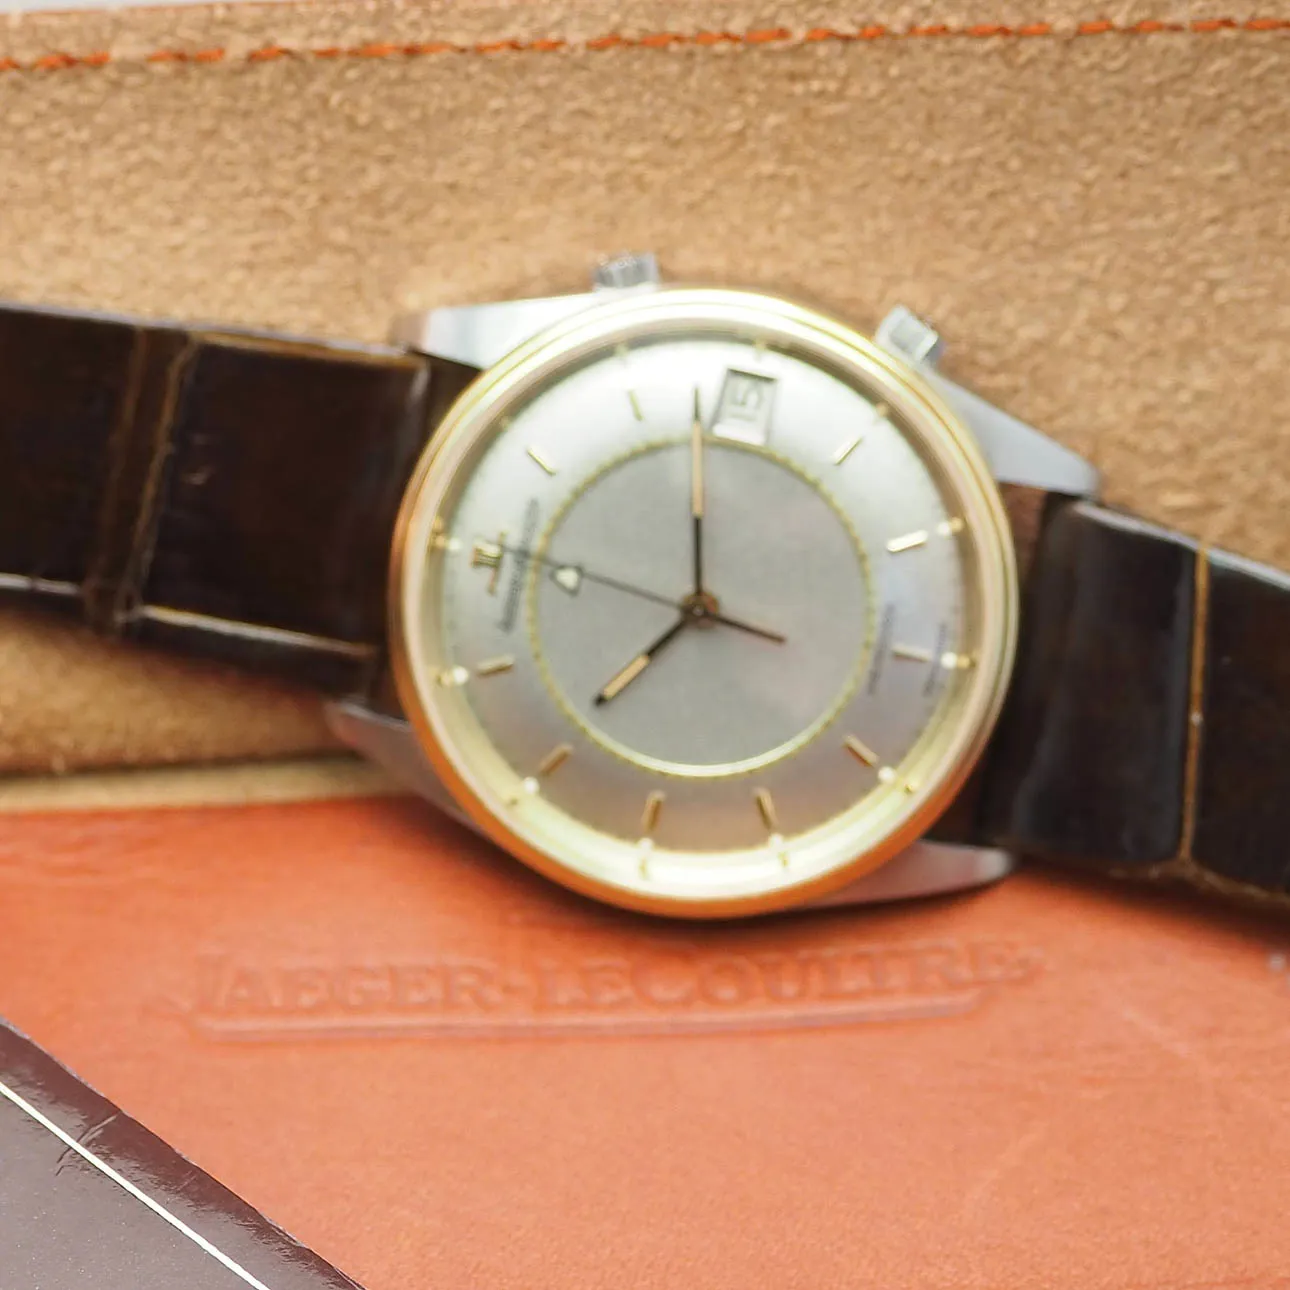 Jaeger-LeCoultre Memovox 141.012.5 36mm Yellow gold 9